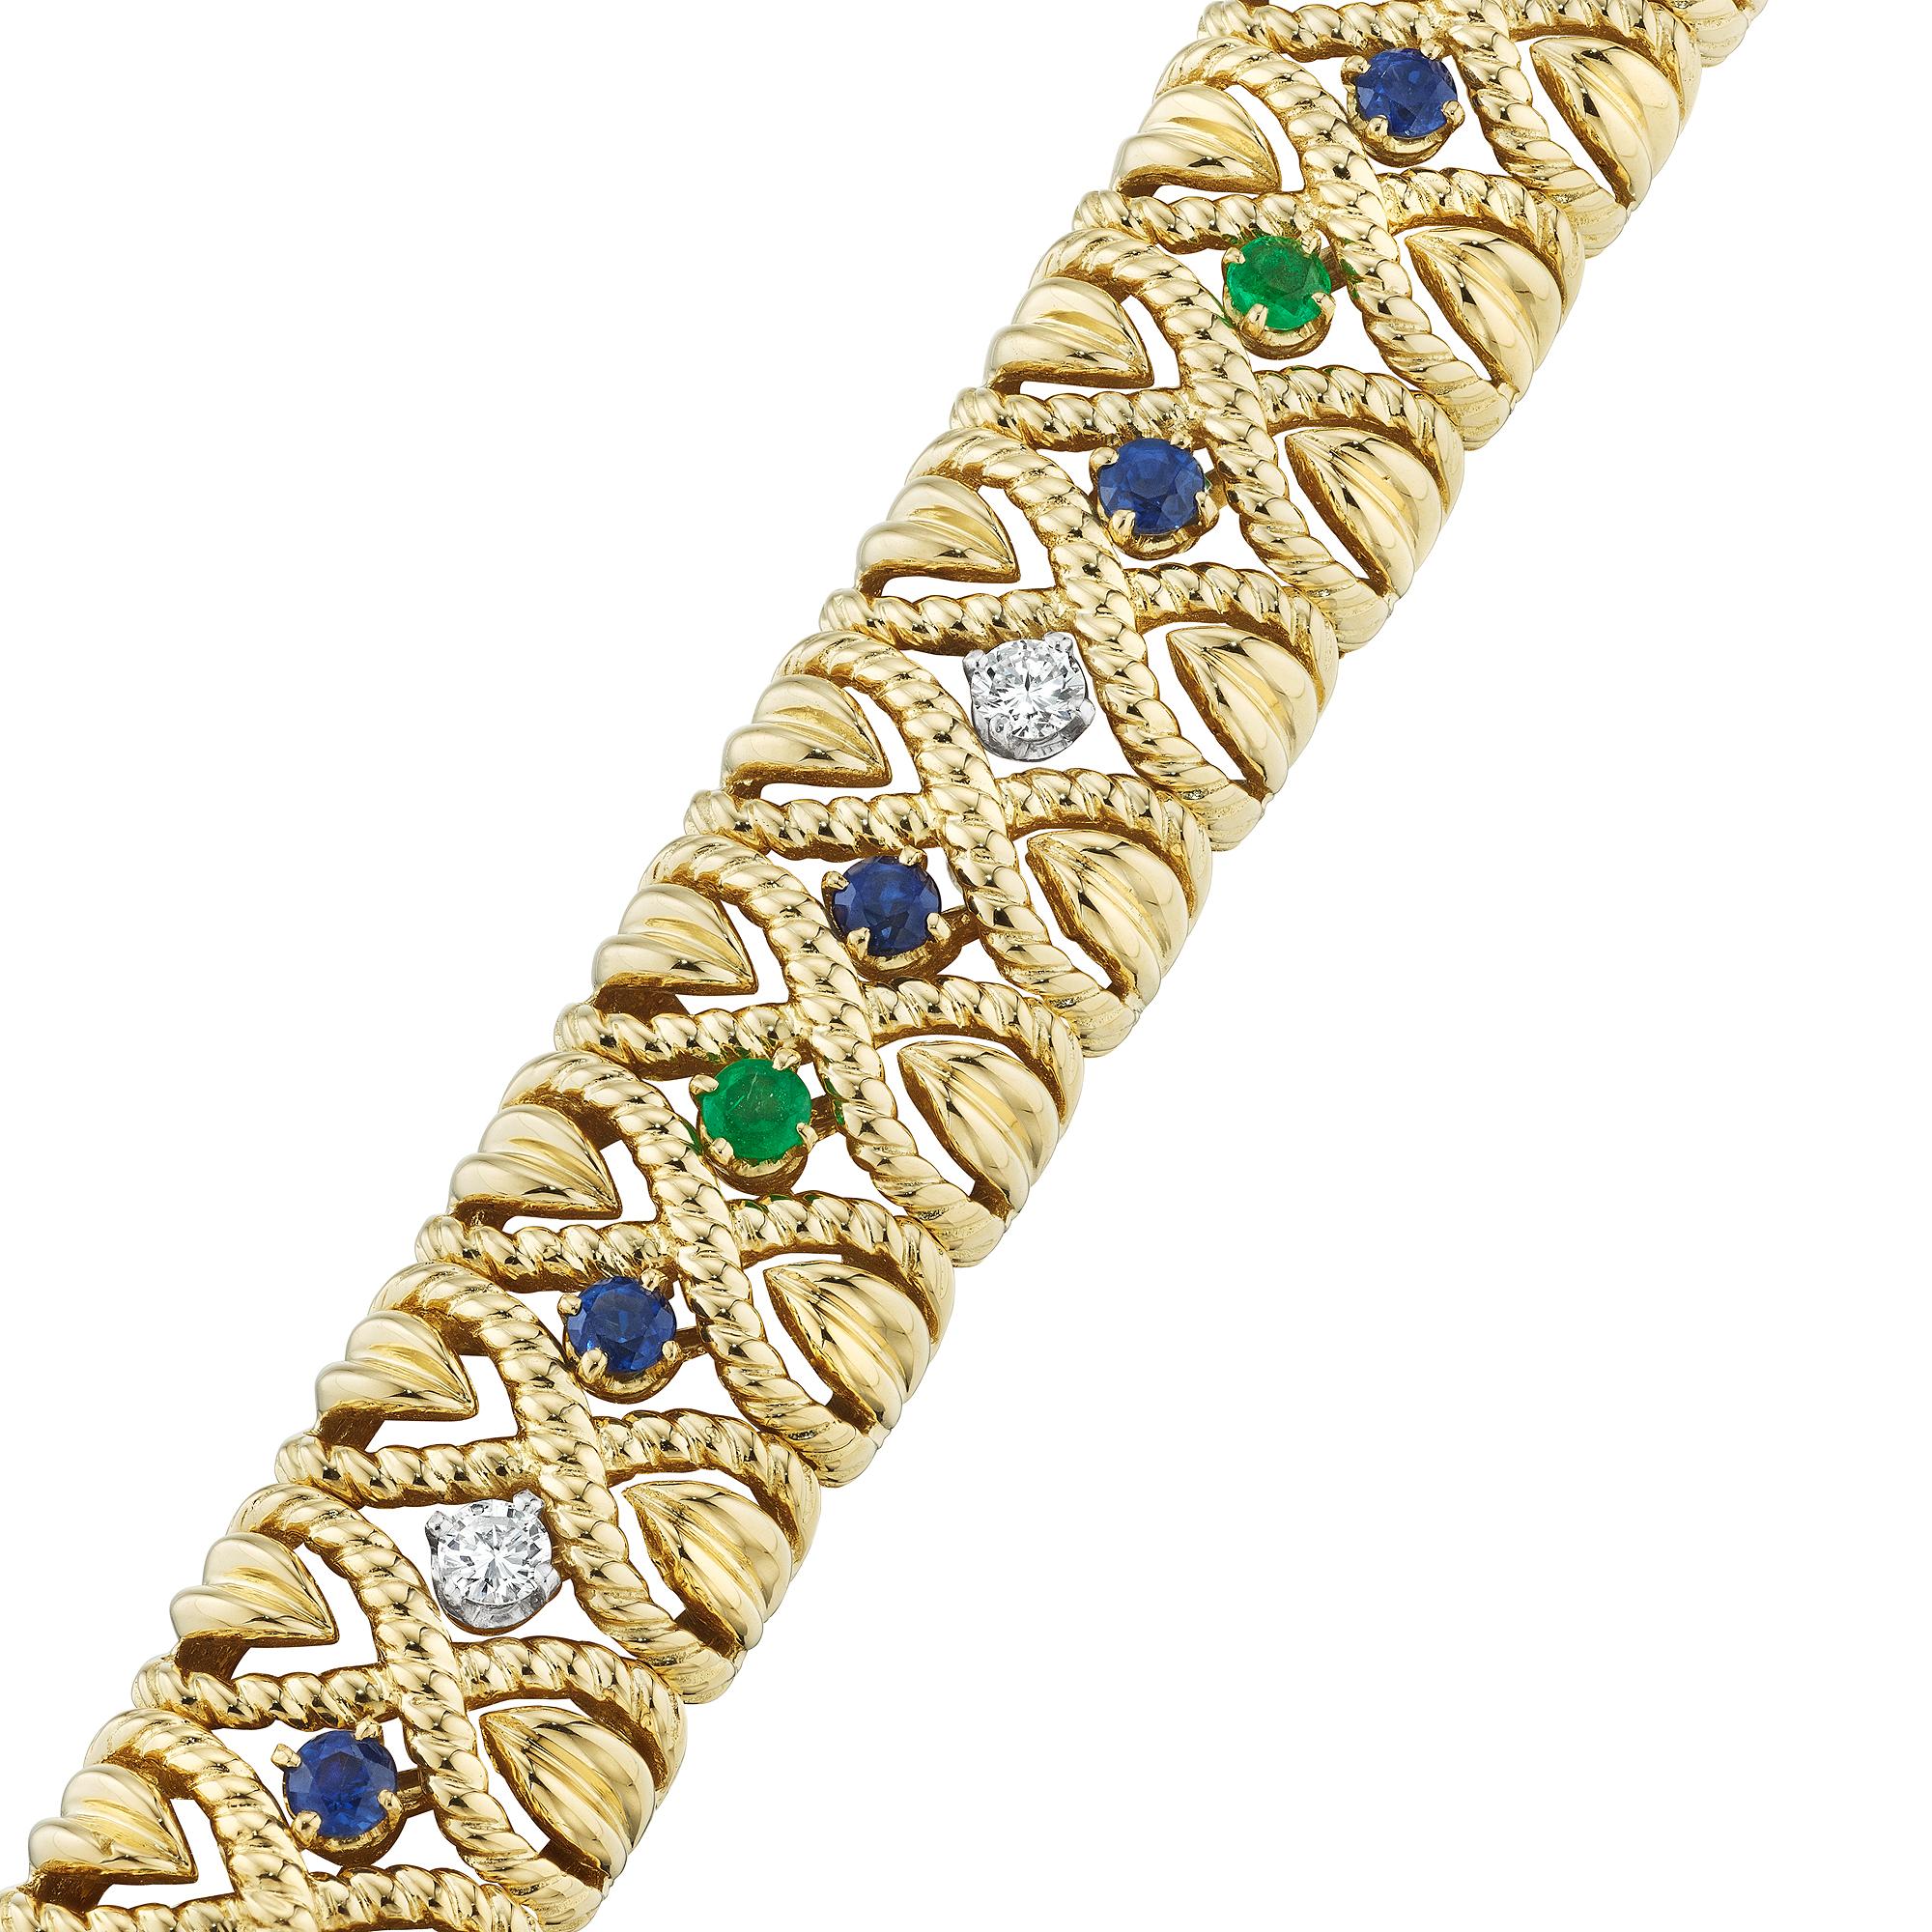 Designed by Van Cleef & Arpels Paris in 1961, this mid-century emerald, sapphire, diamond gold 'X' bracelet, is the ultimate in timeless grace.  Worn alone or stacked with other bracelets, this collectible jewel is irresistible.  Circa 1961.  Total